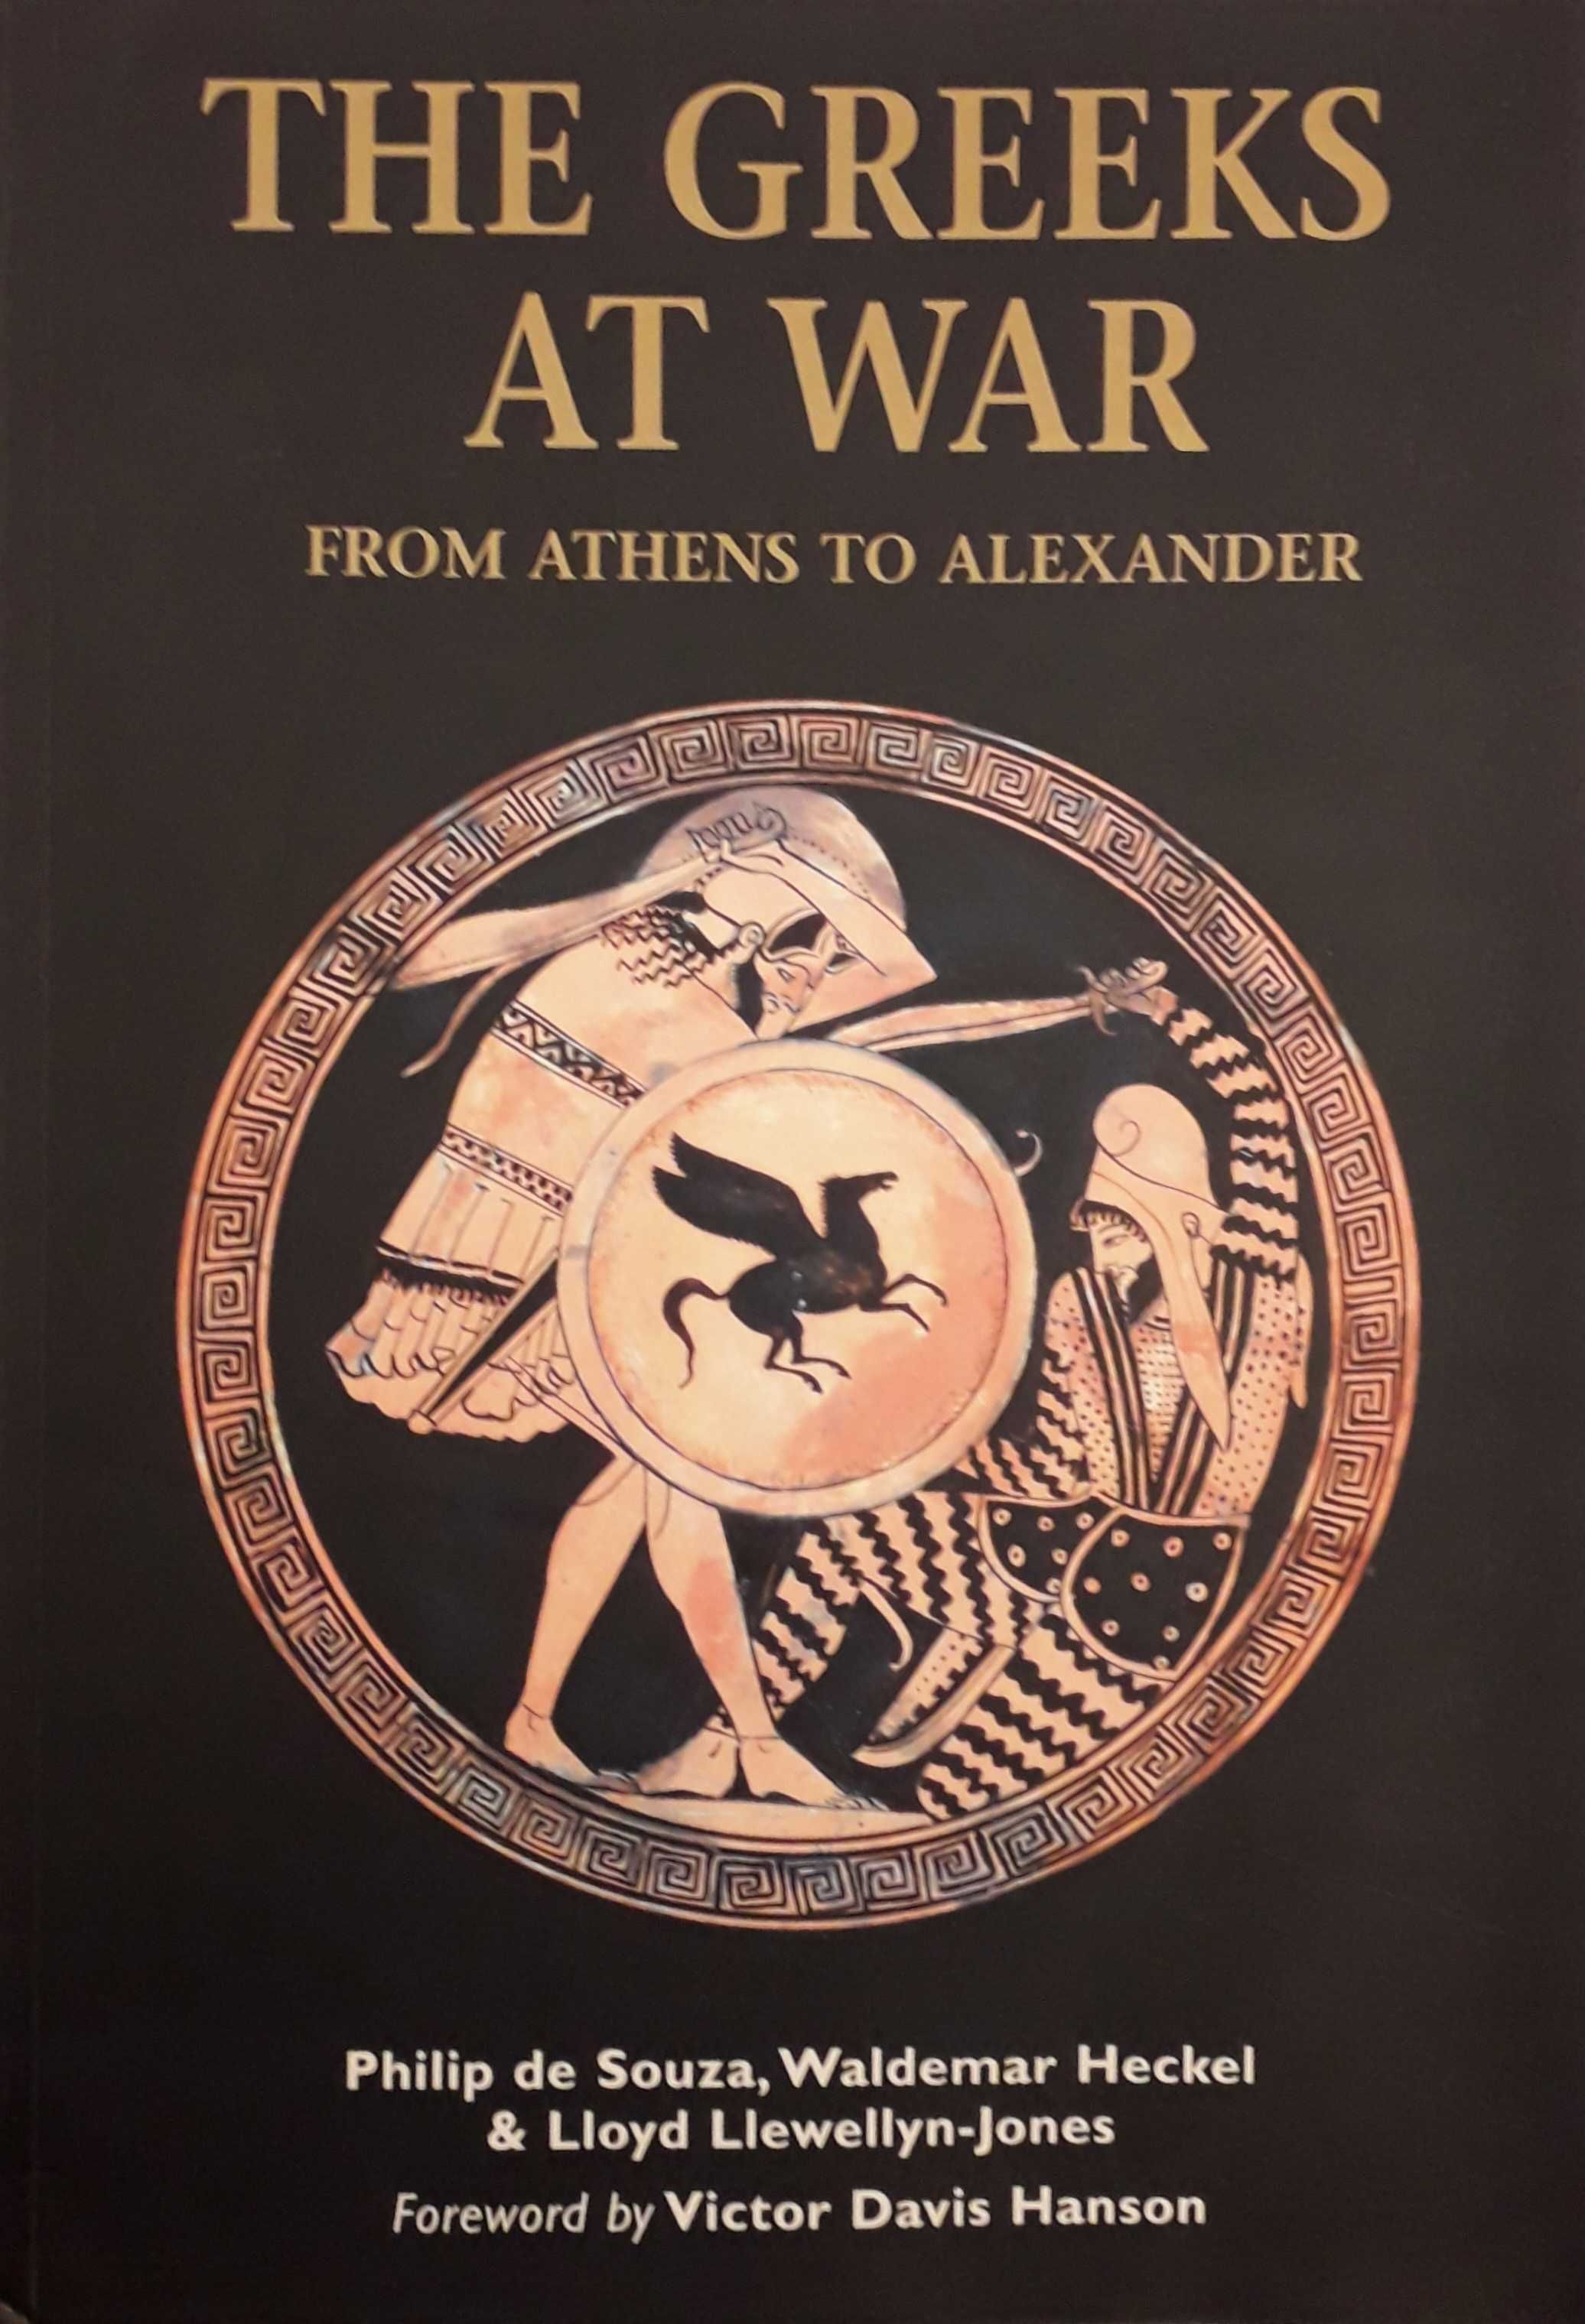 Livro - The Greeks at War. From Athens to Alexander